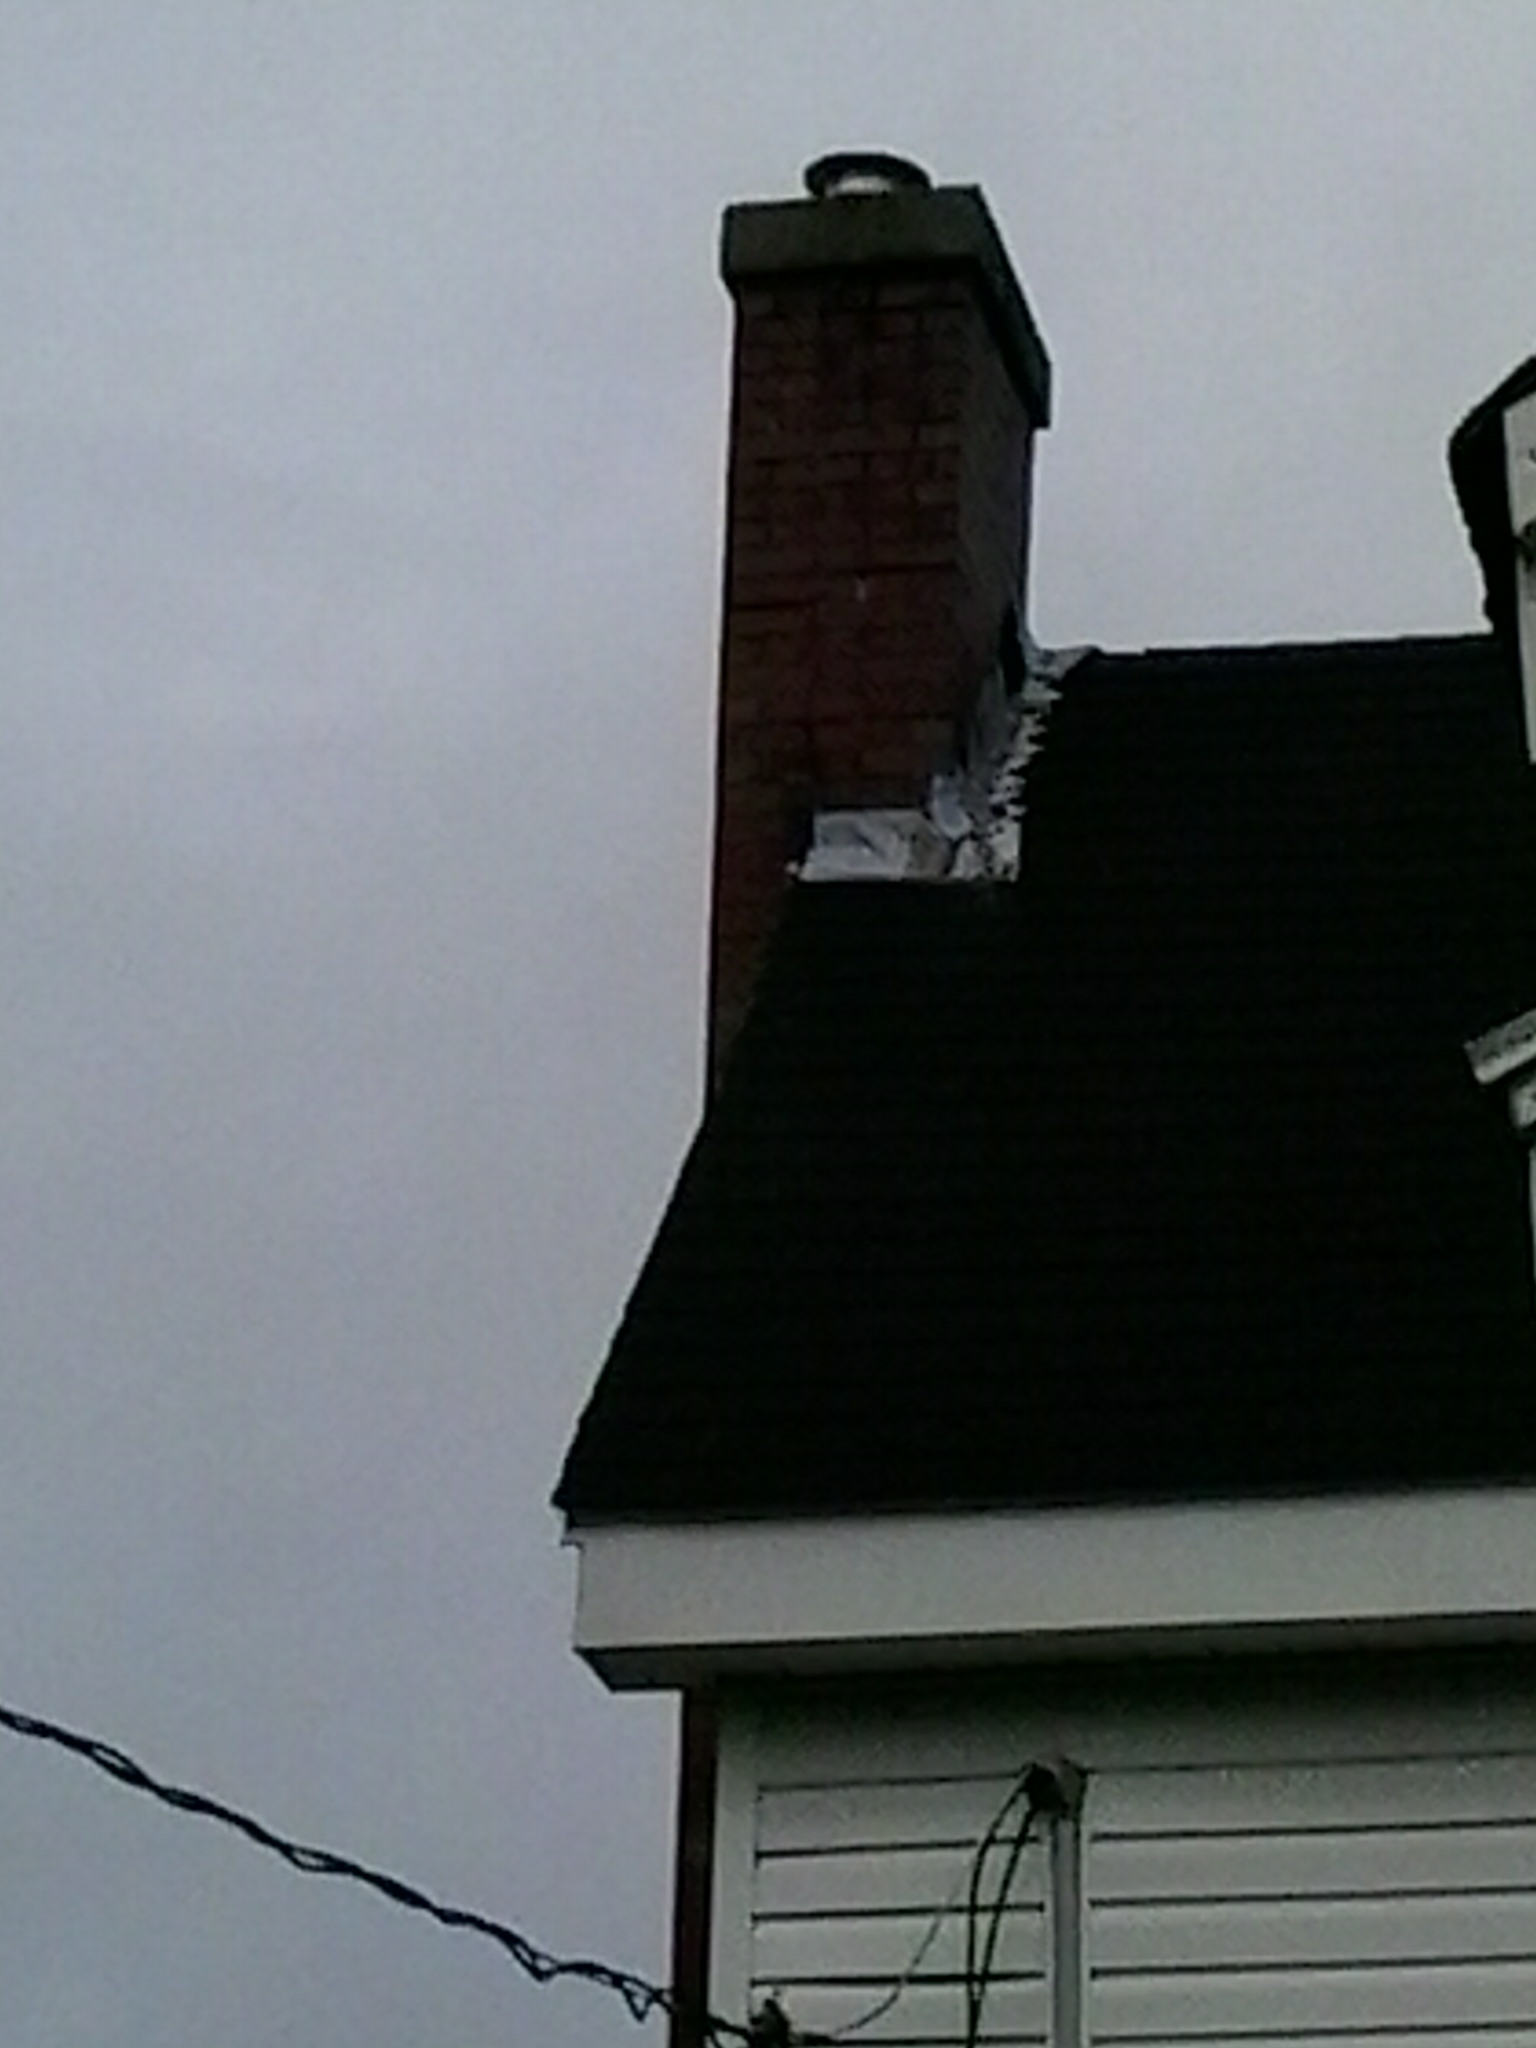 image of chimney-chimney repair services completed in Halifax-Dartmouth Regional Municipality, NS by Pro Chimney Services based in Halifax, NS servicing all of the Halifax-Dartmouth Regional Municipality, Bedford, Sackville, Mount Uniacke, Windsor, Hantsport, Wolfville, Kentville, Chester, Mahone Bay, Lunenburg, Bridgewater, Liverpool, Fall River, Wellington, Enfield, Elmsdale, Brookfield, Truro, Musquodoboit Harbour & surrounding areas.